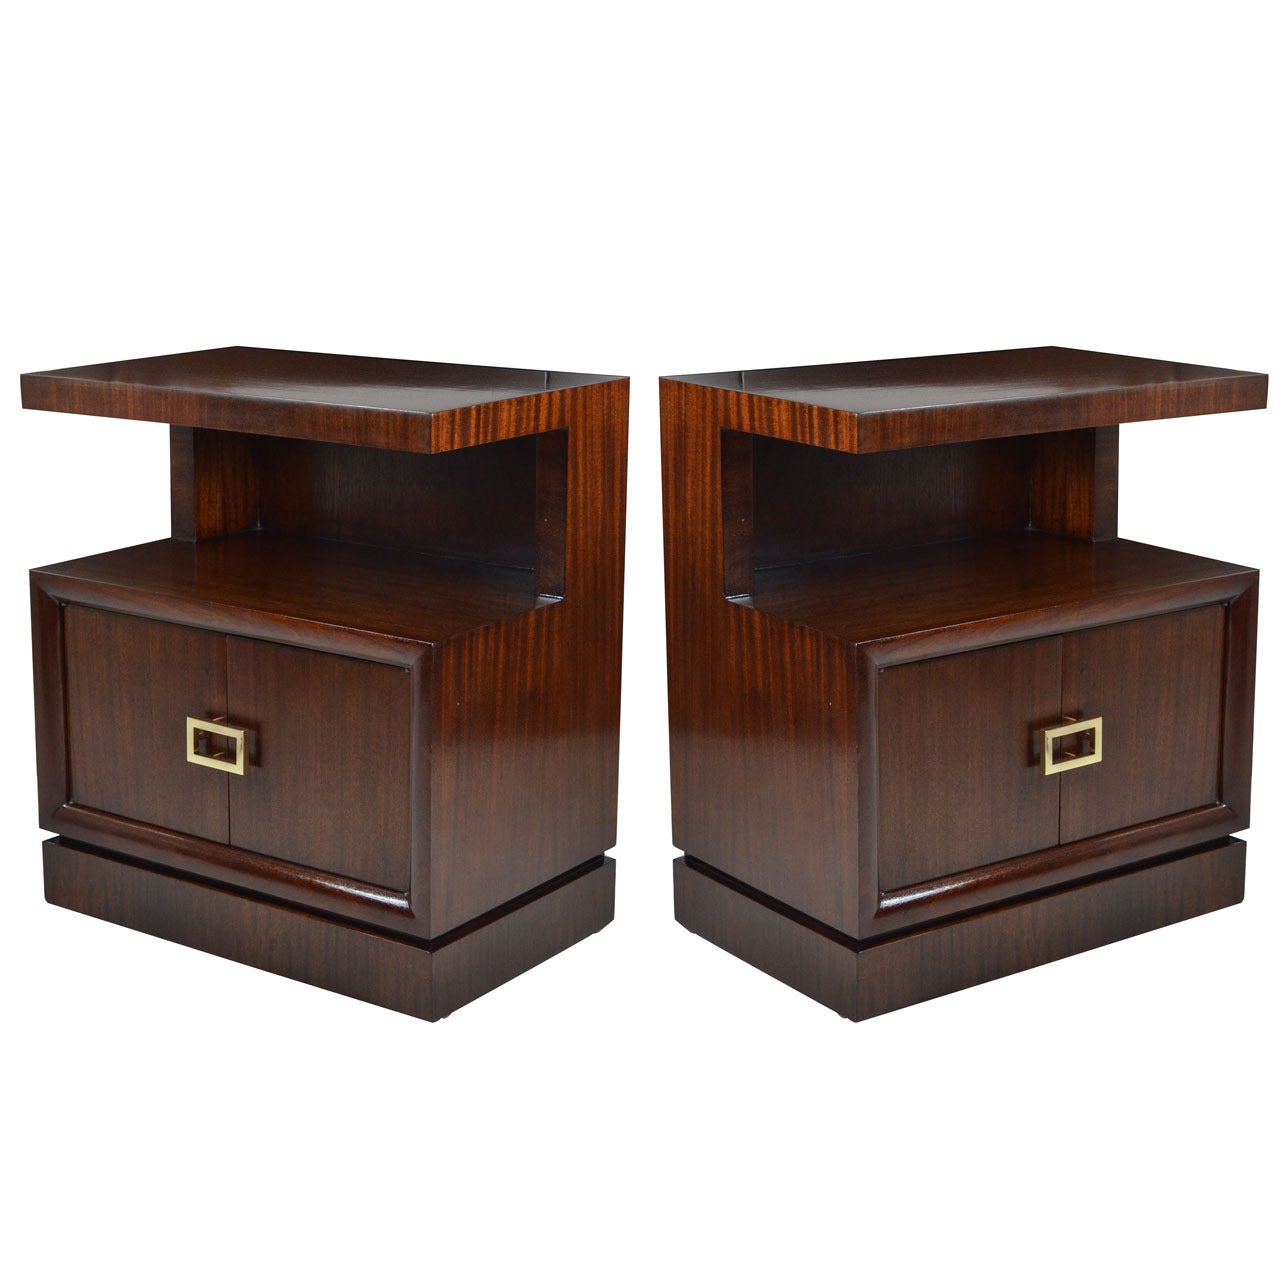 Pair of Mahogany Chests after Grosfeld House